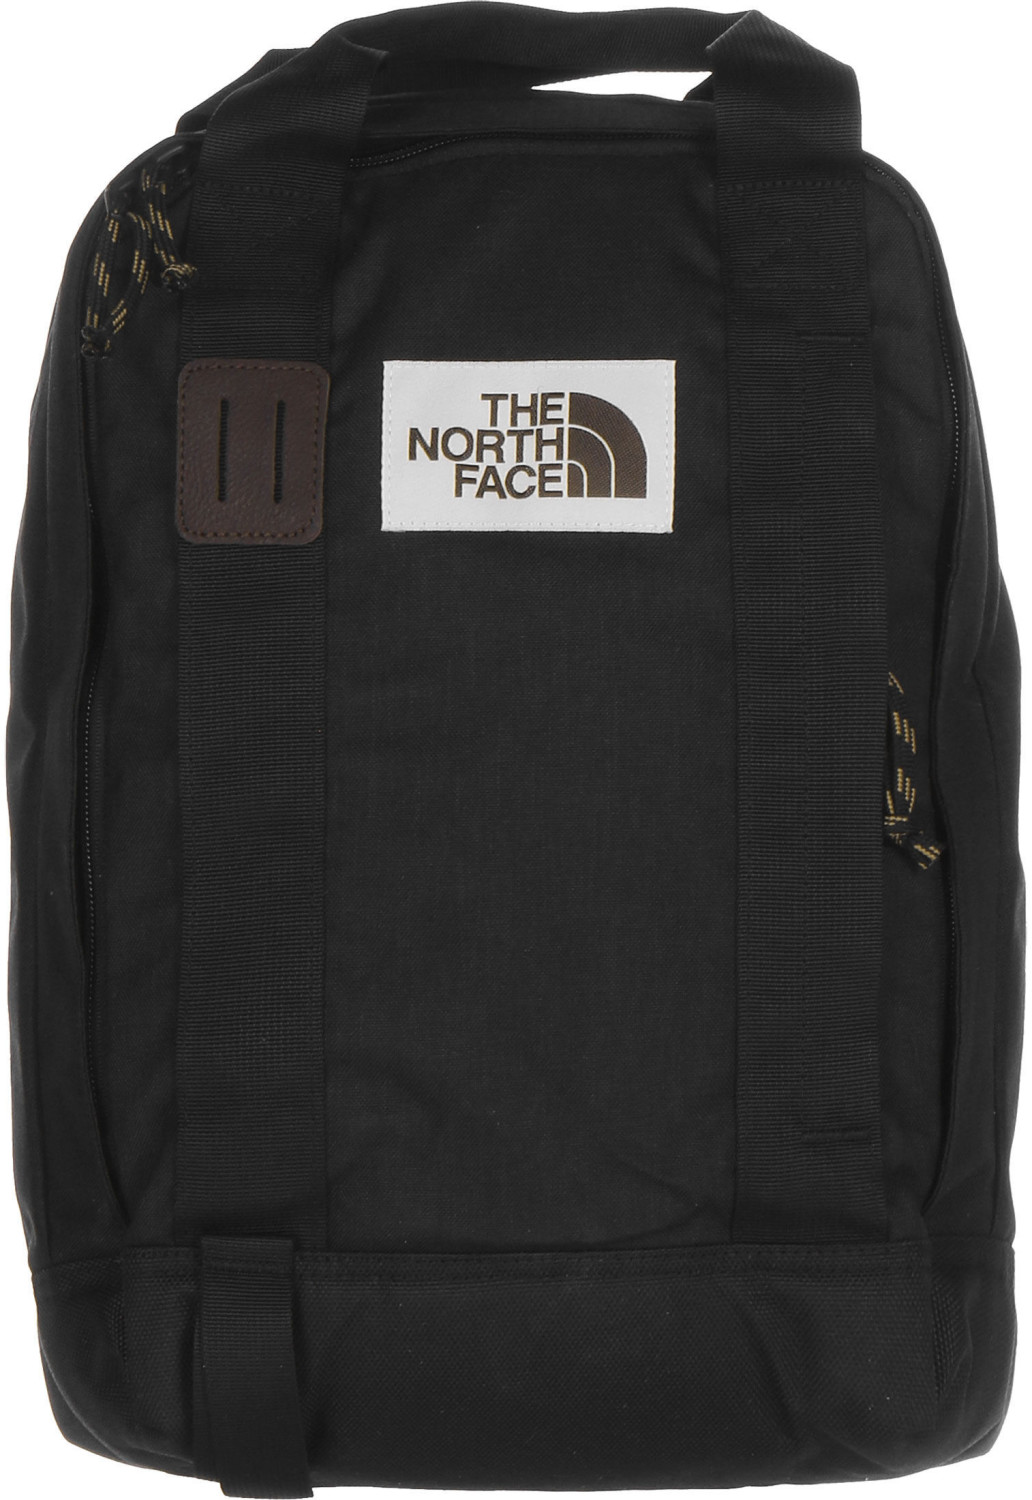 Buy The North Face Tote Pack tnf black heather from £45.00 (Today